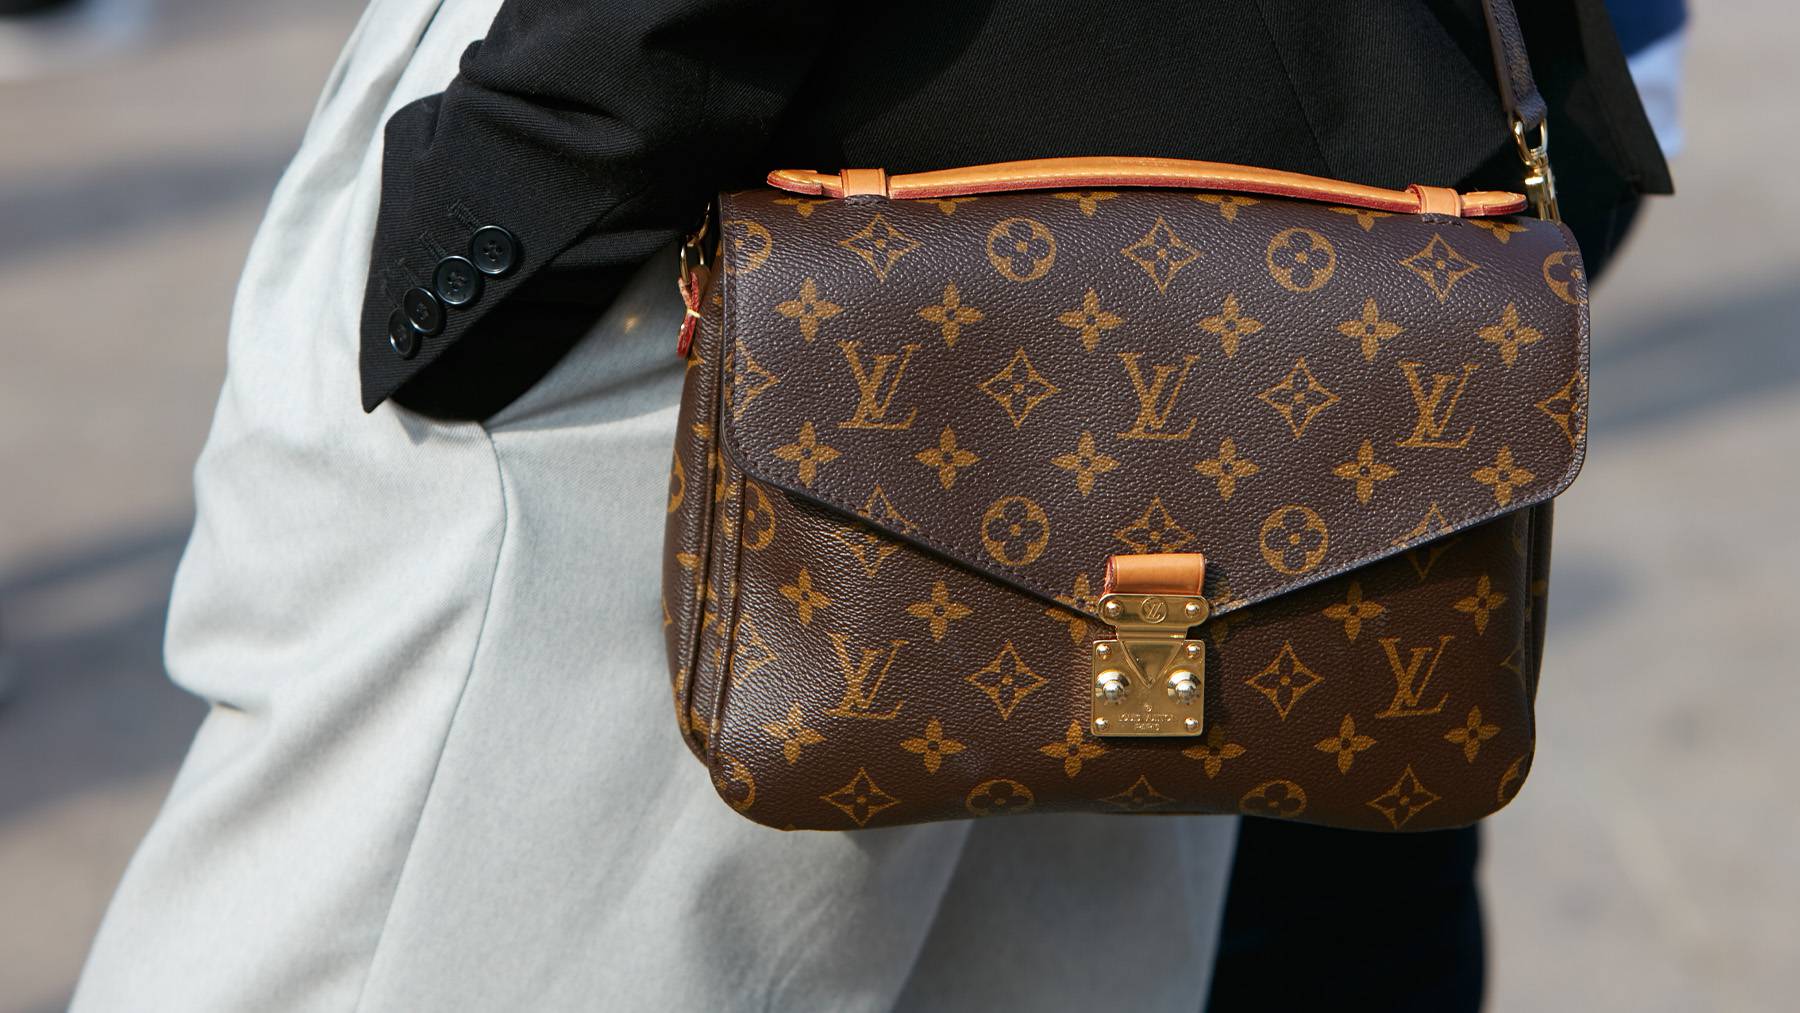 LVMH is cracking down on counterfeits. Shutterstock.